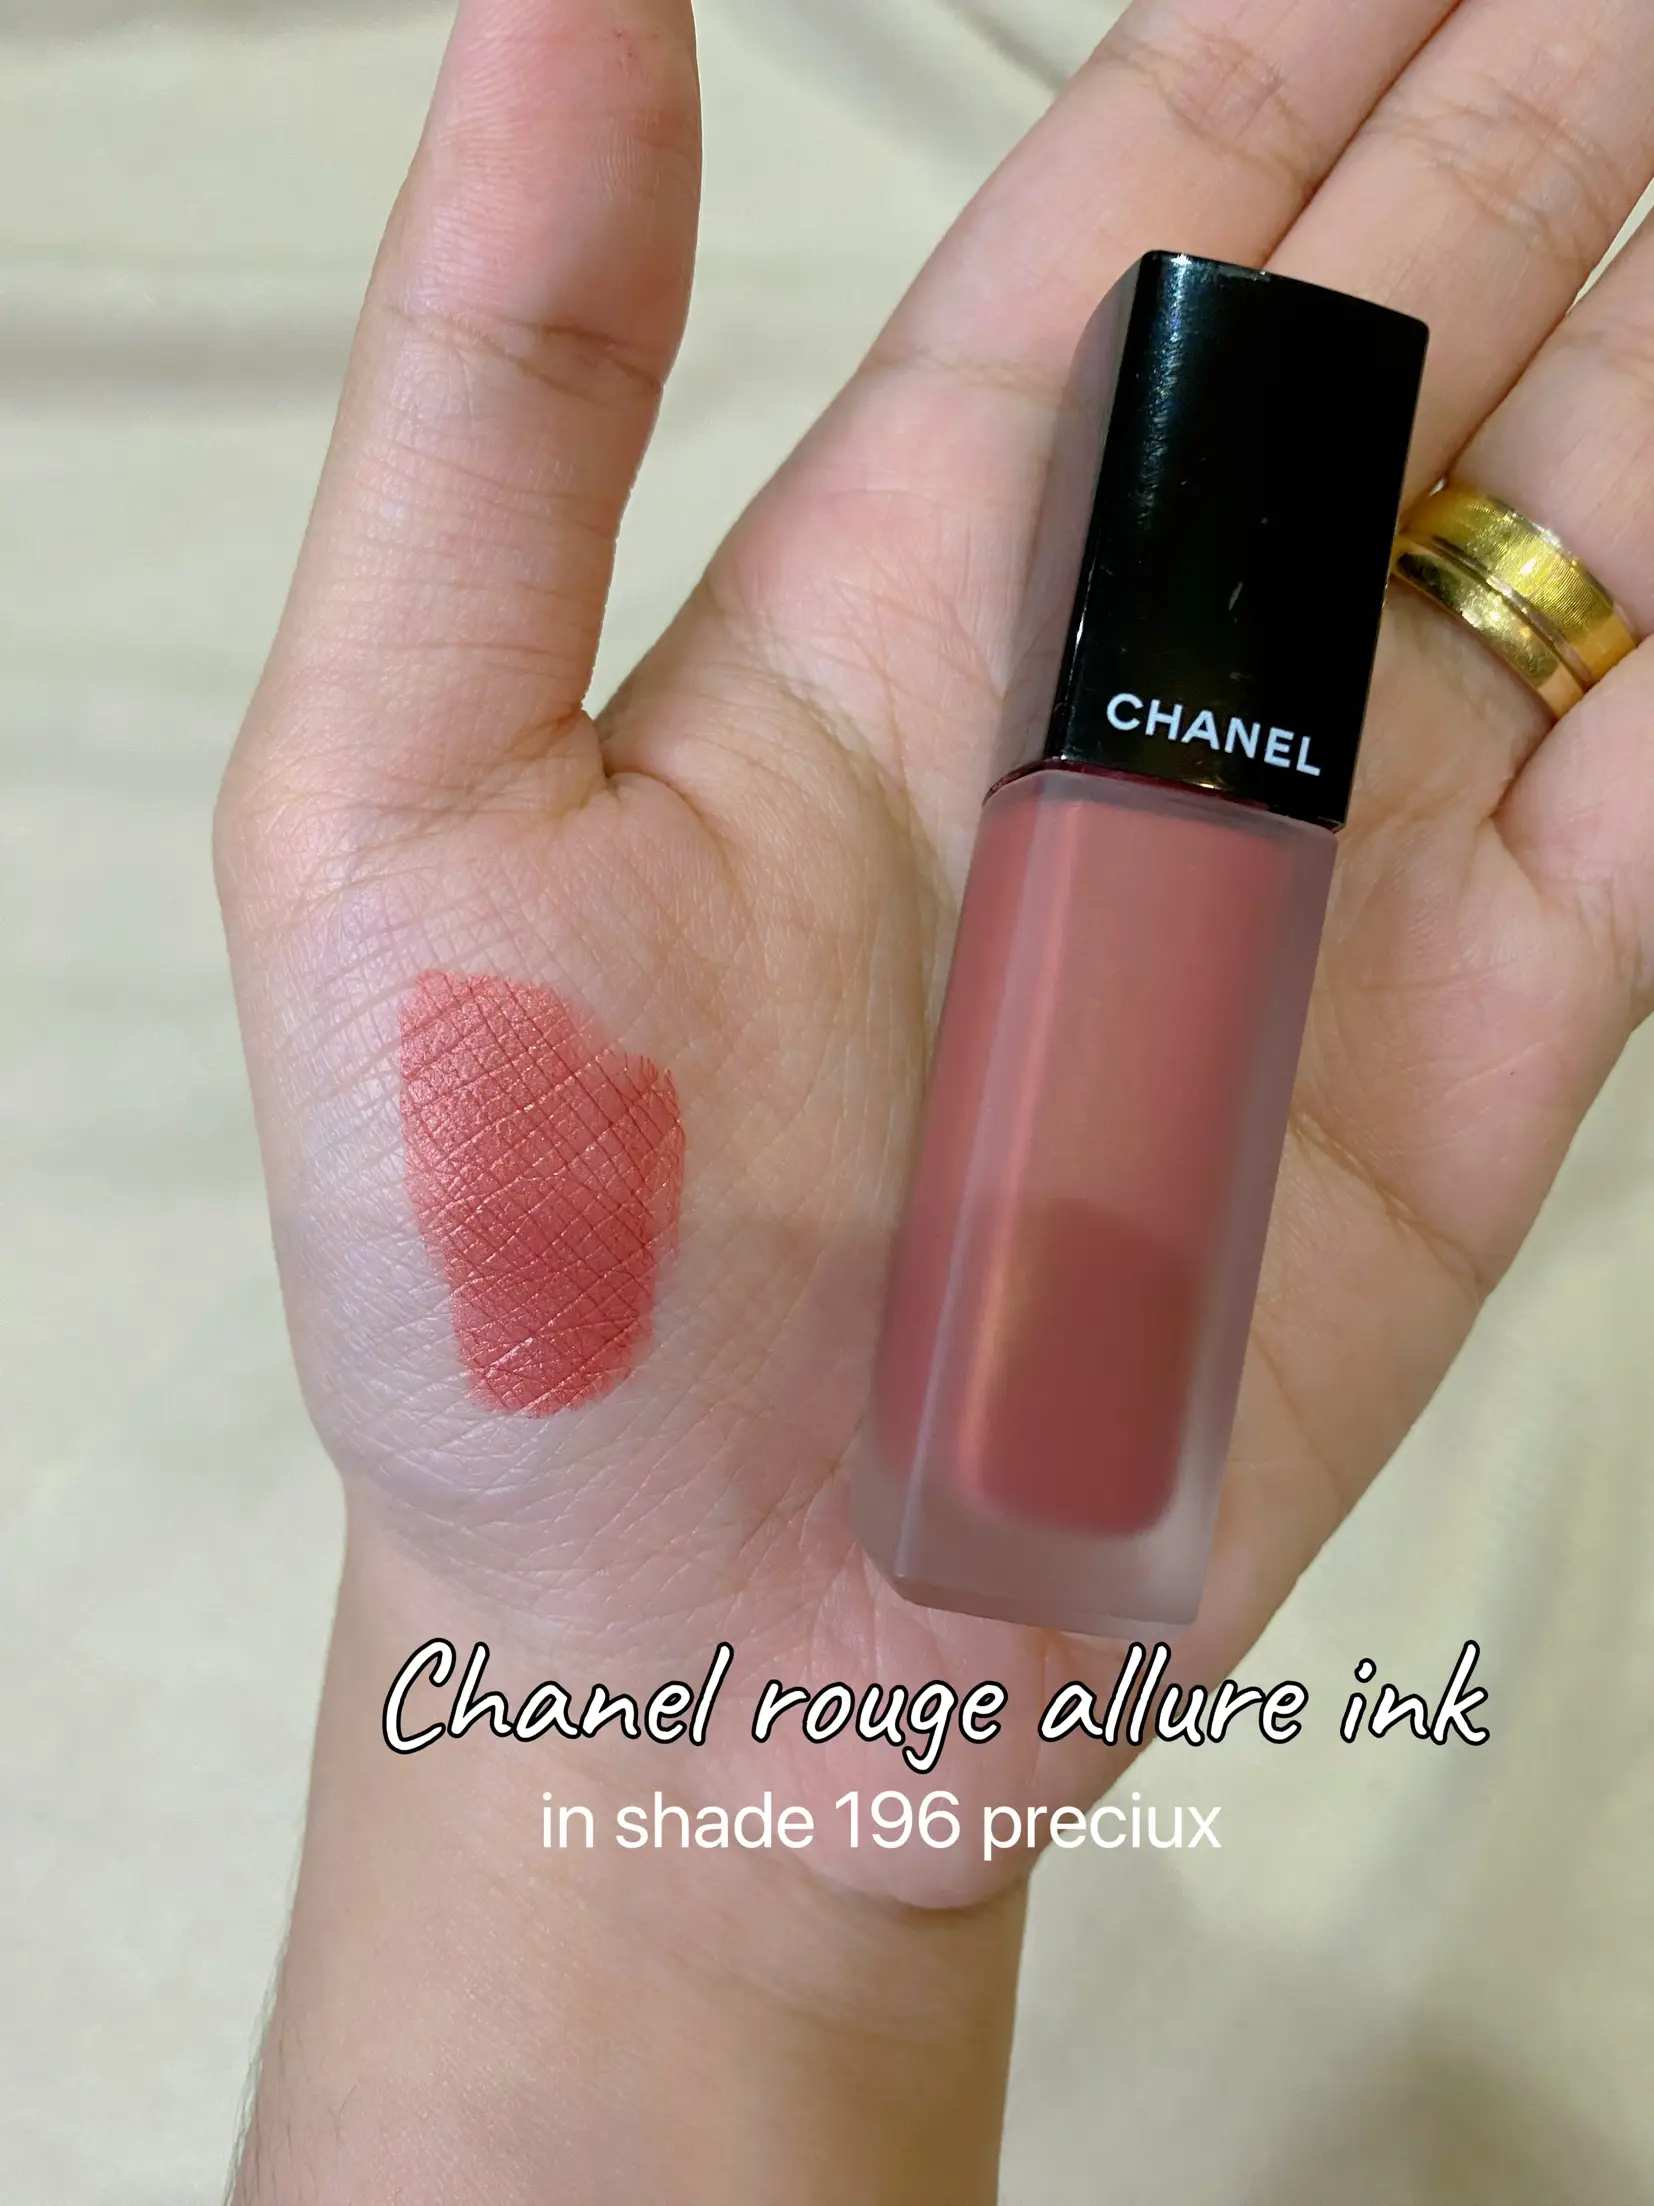 6 Top Chanel Lipsticks You Mush Have 💄, Gallery posted by Cecilia.S